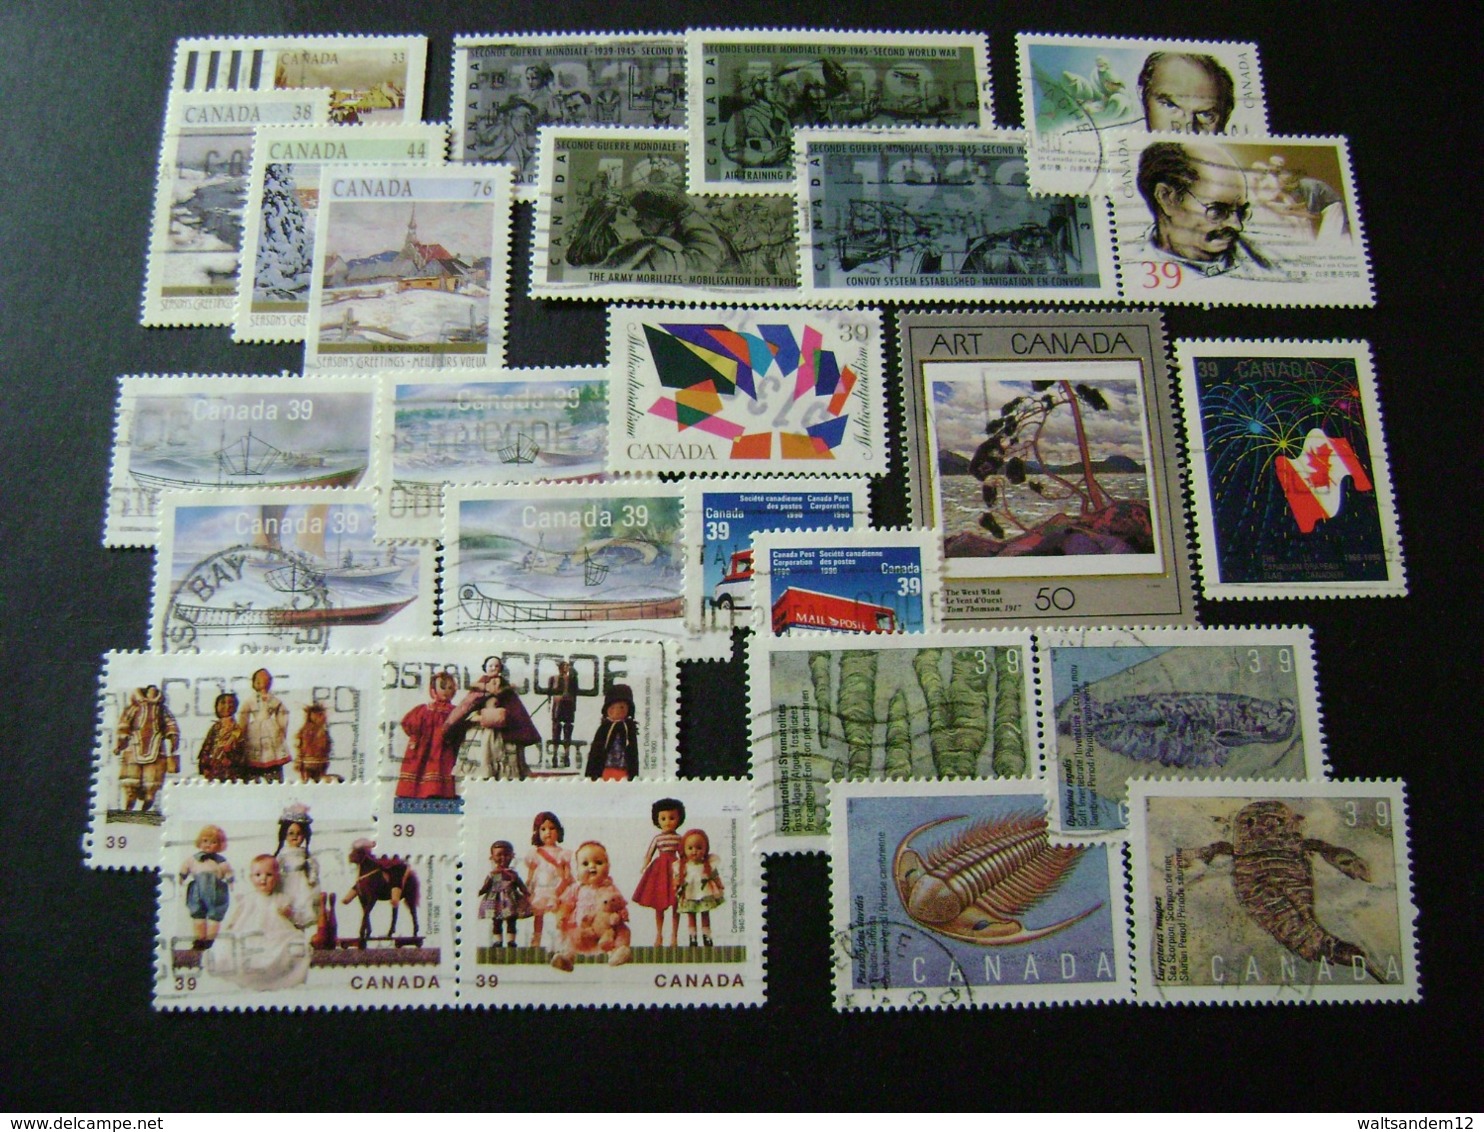 Canada 1989 To 1991 Commemorative/special Issues Complete (SG 1315-1327, 1329-1349, 1375-1459) 5 Images - Used - Complete Years